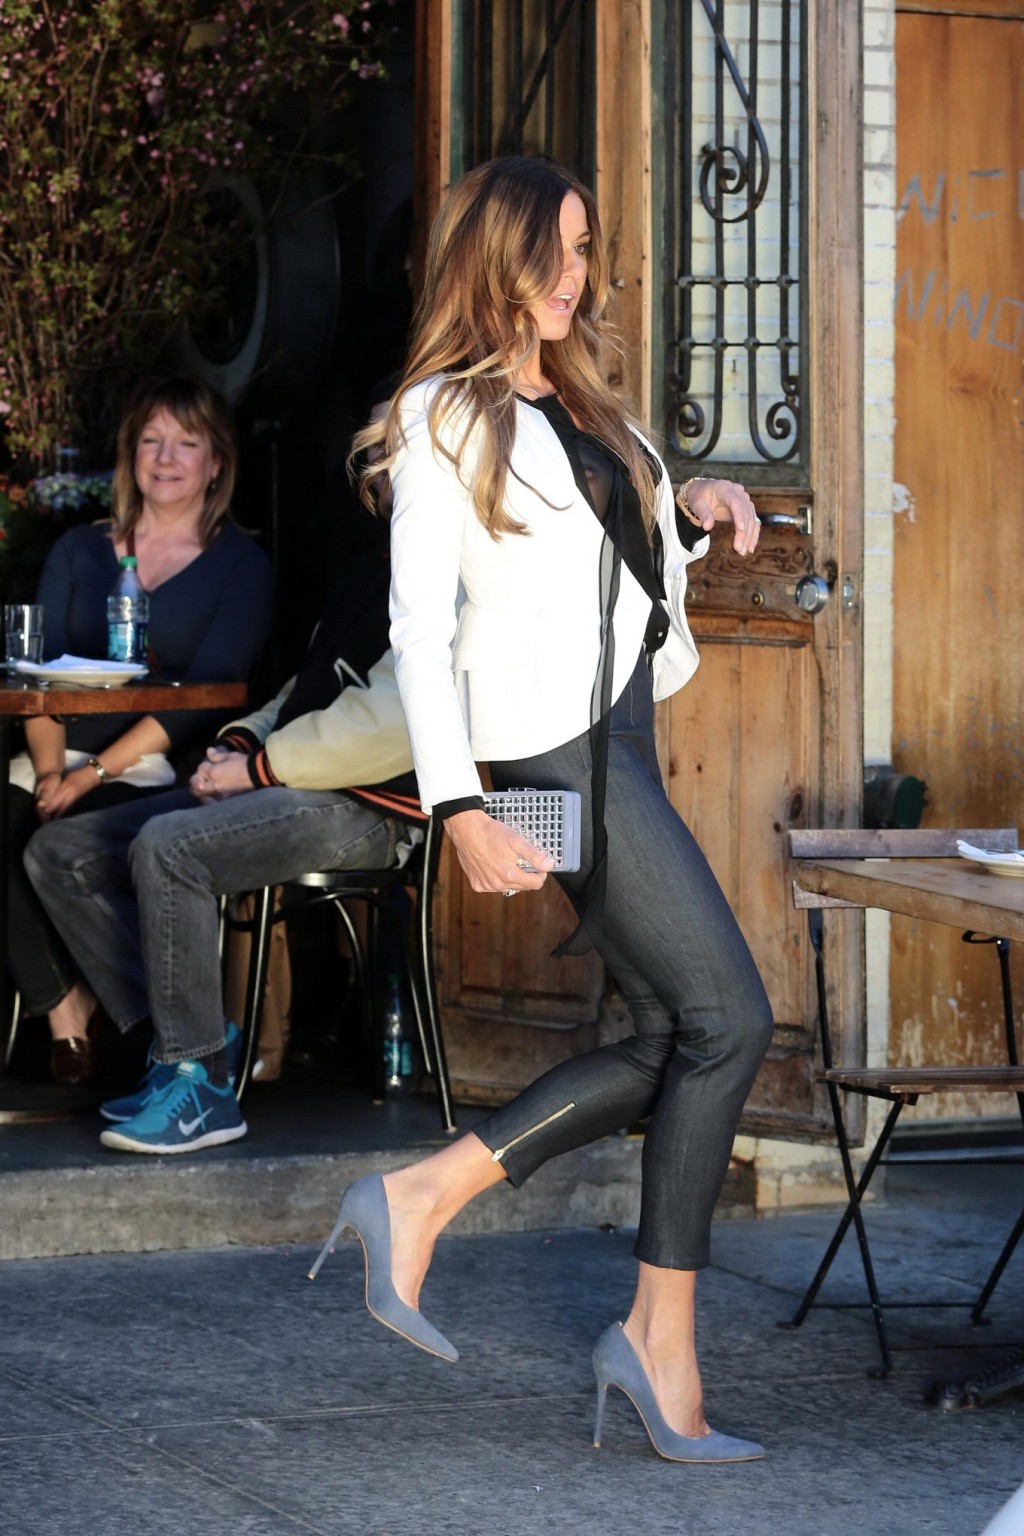 Kelly Bensimon shows off her big boobs wearing a see through shirt at the photos #75166034